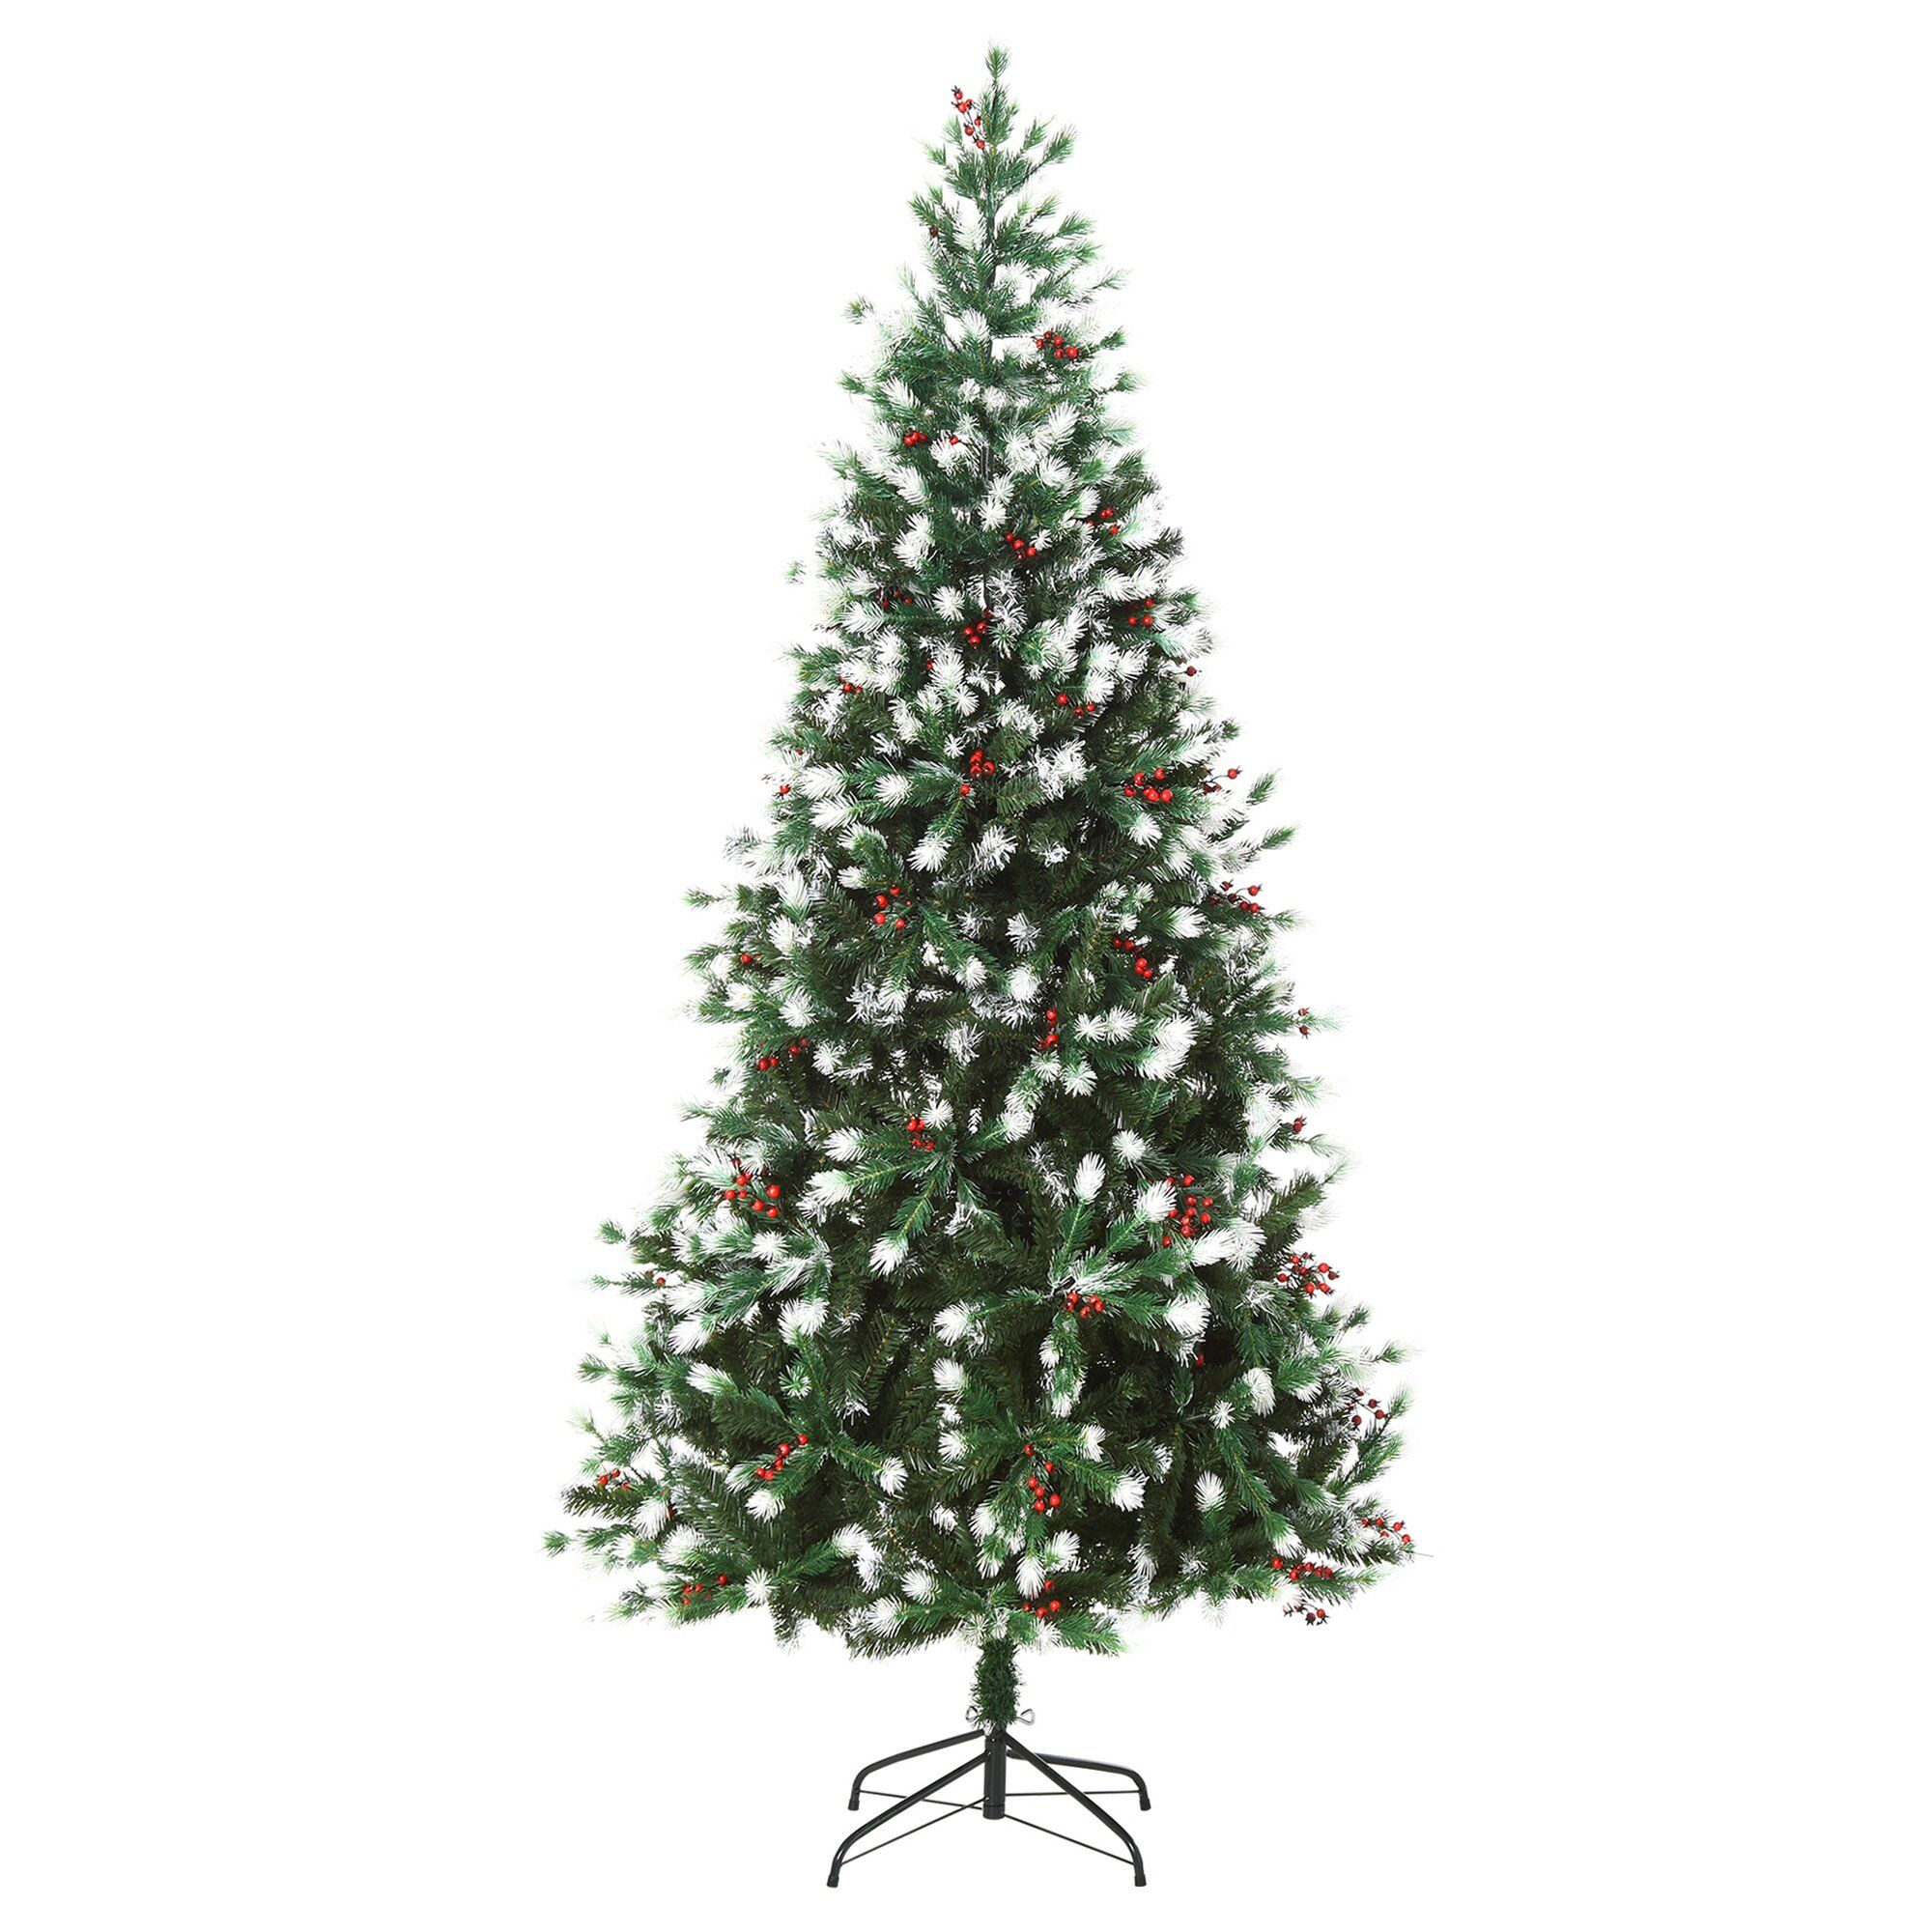 HOMCOM 7ft Artificial Snow-Flocked Pine Tree, Holiday Home Christmas Decoration Tree with Red Berries, Automatic Open, Green/White